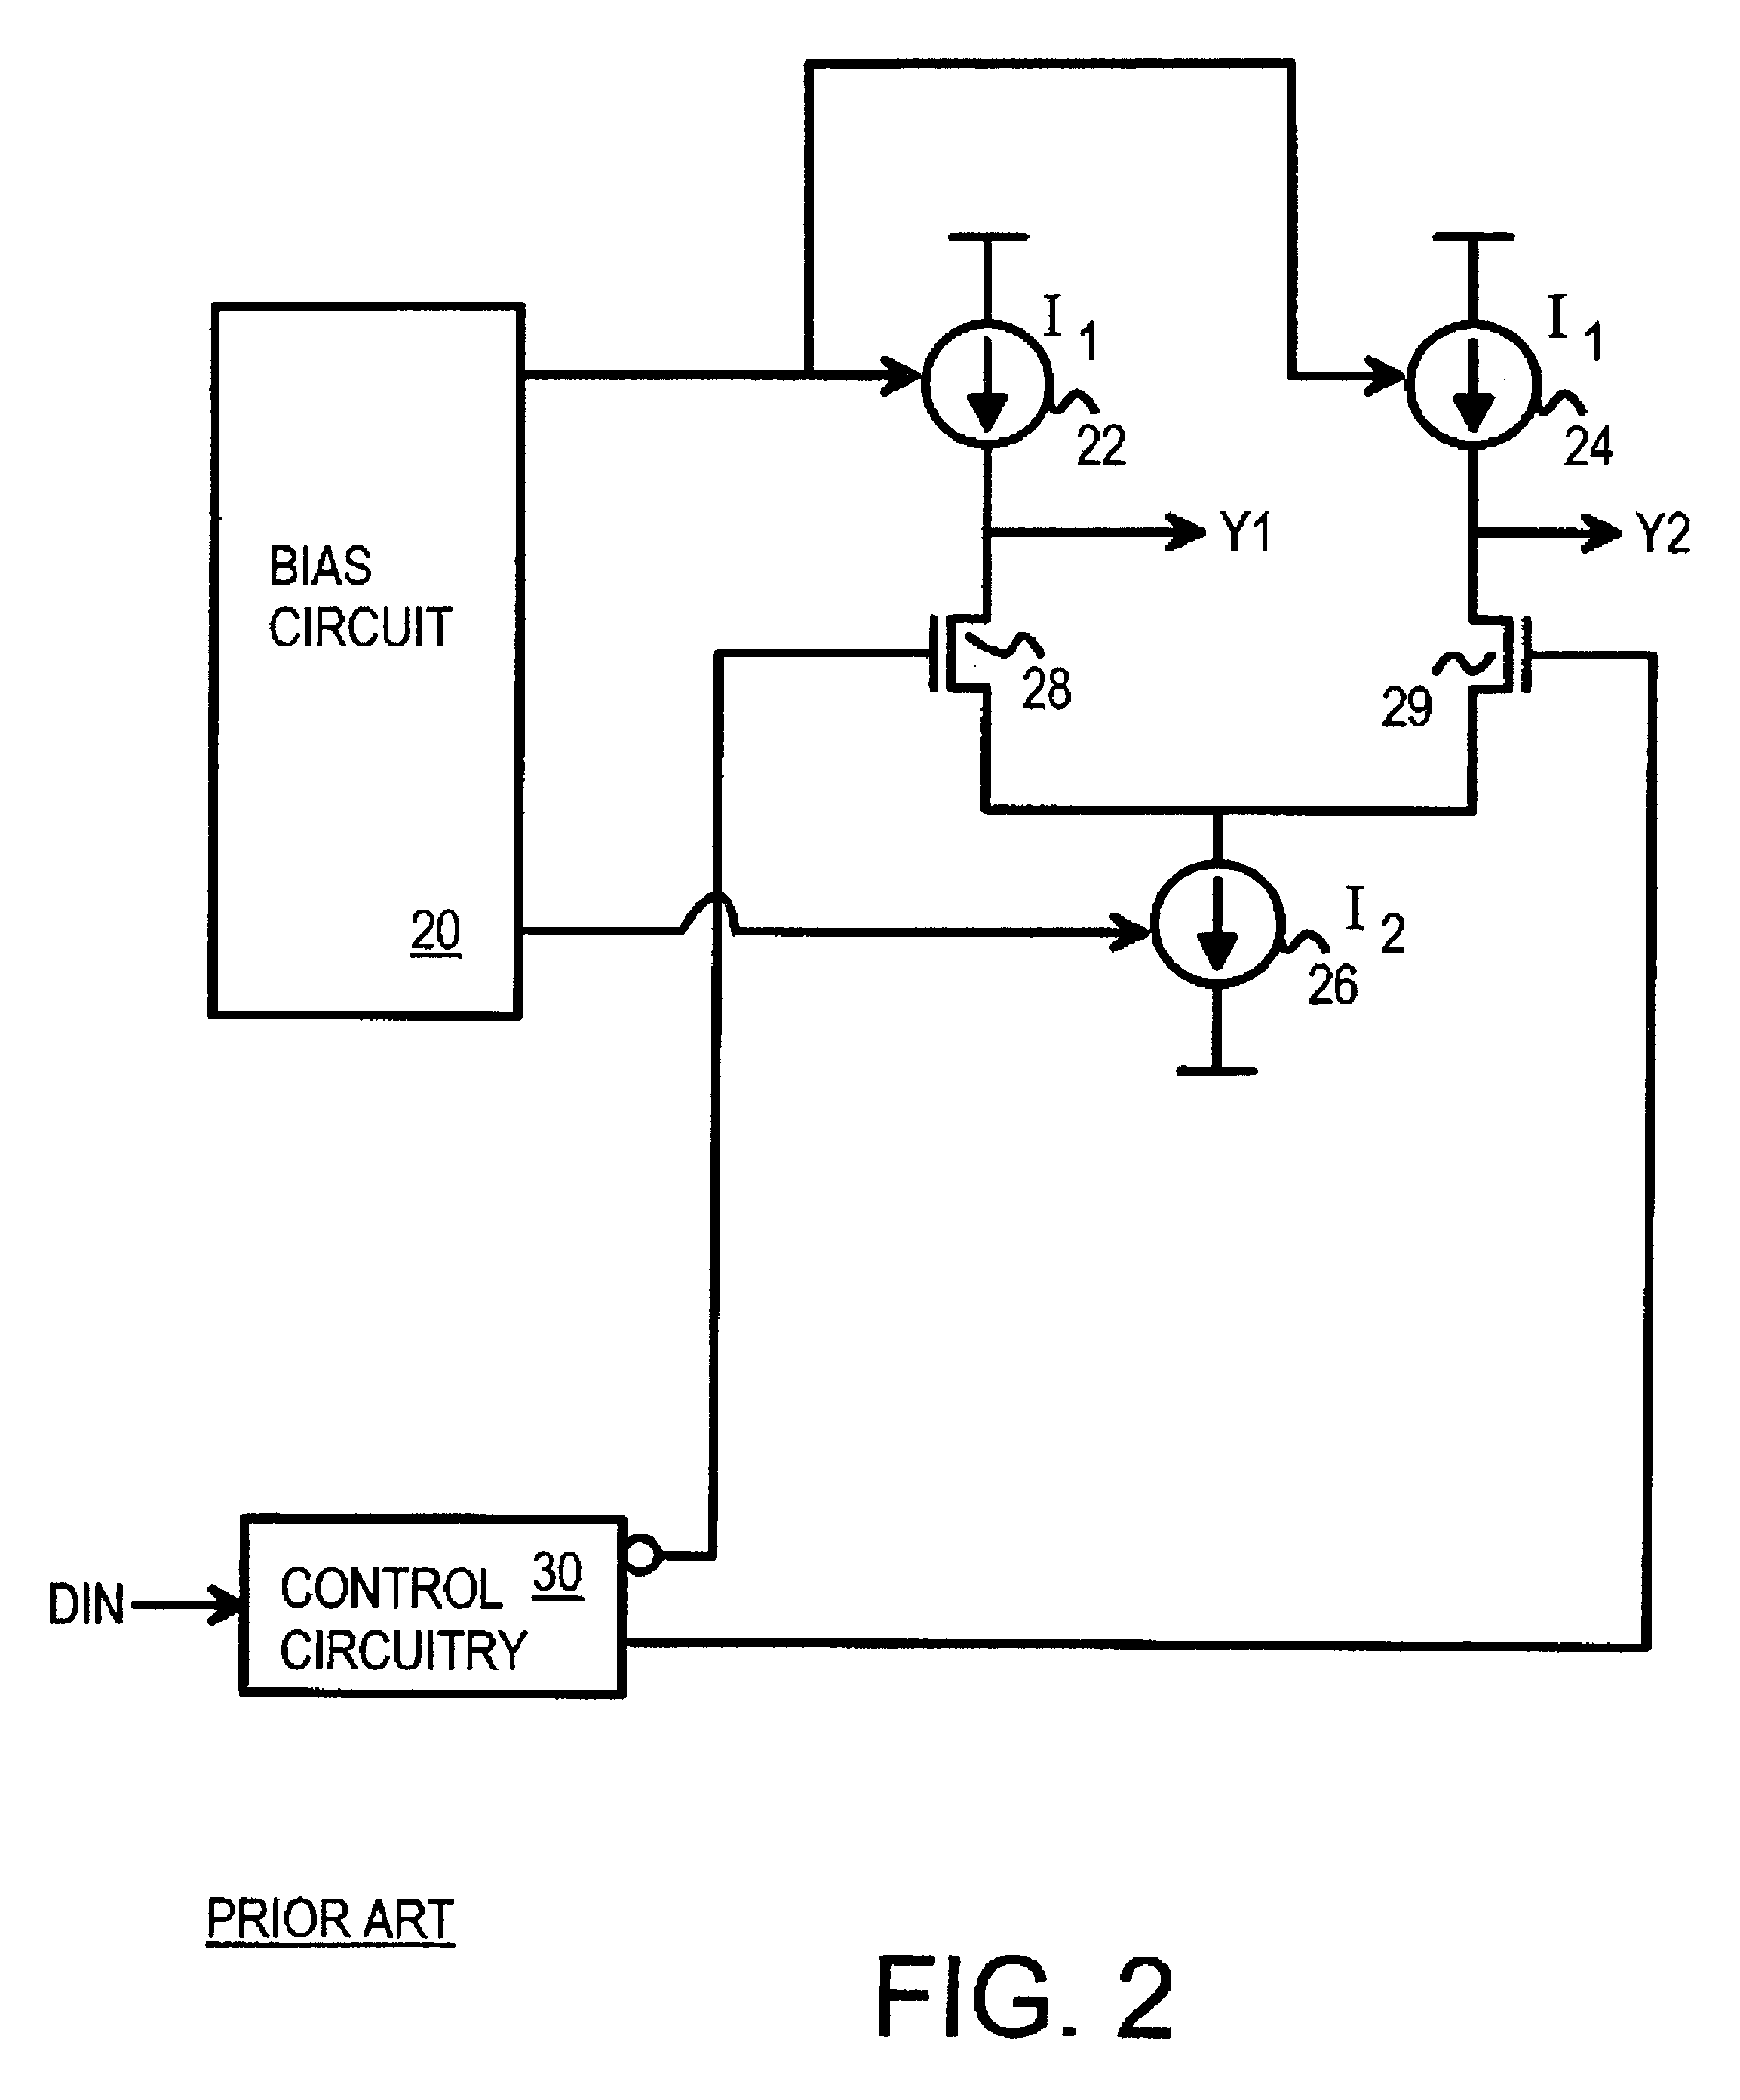 CMOS low-voltage PECL driver with initial current boost